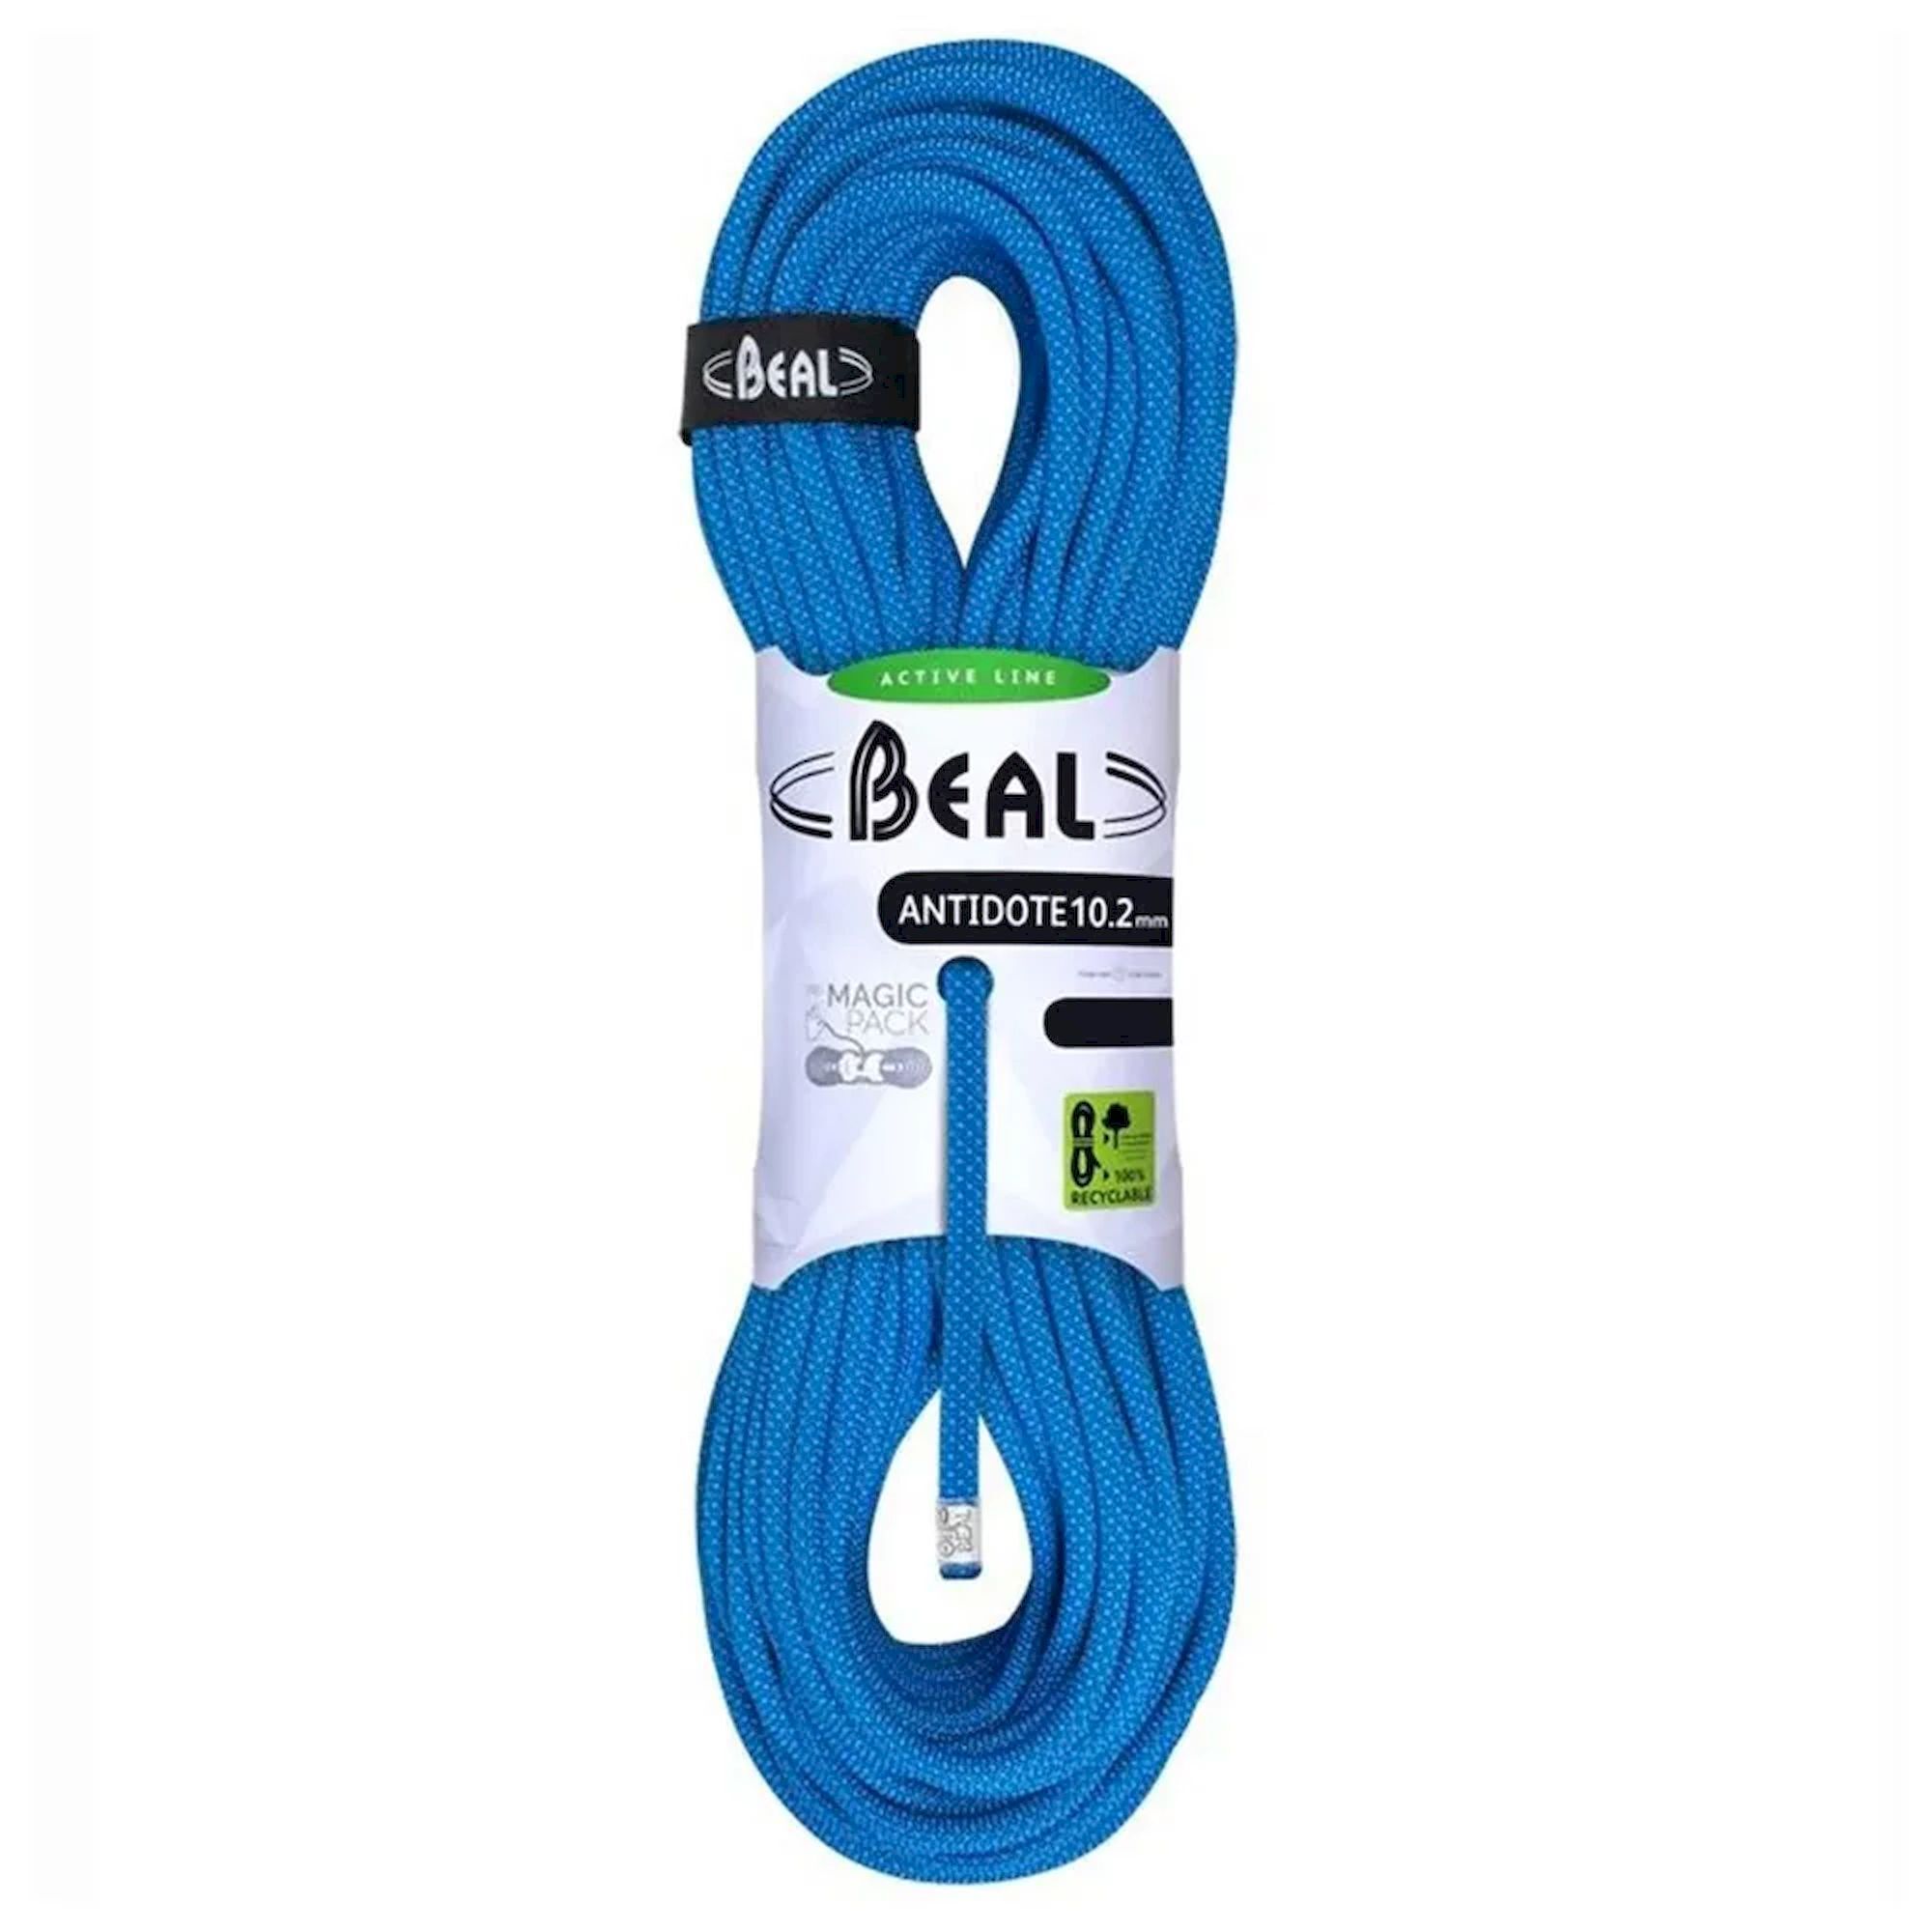 Beal Antidote 10.2mm - Kletterseil